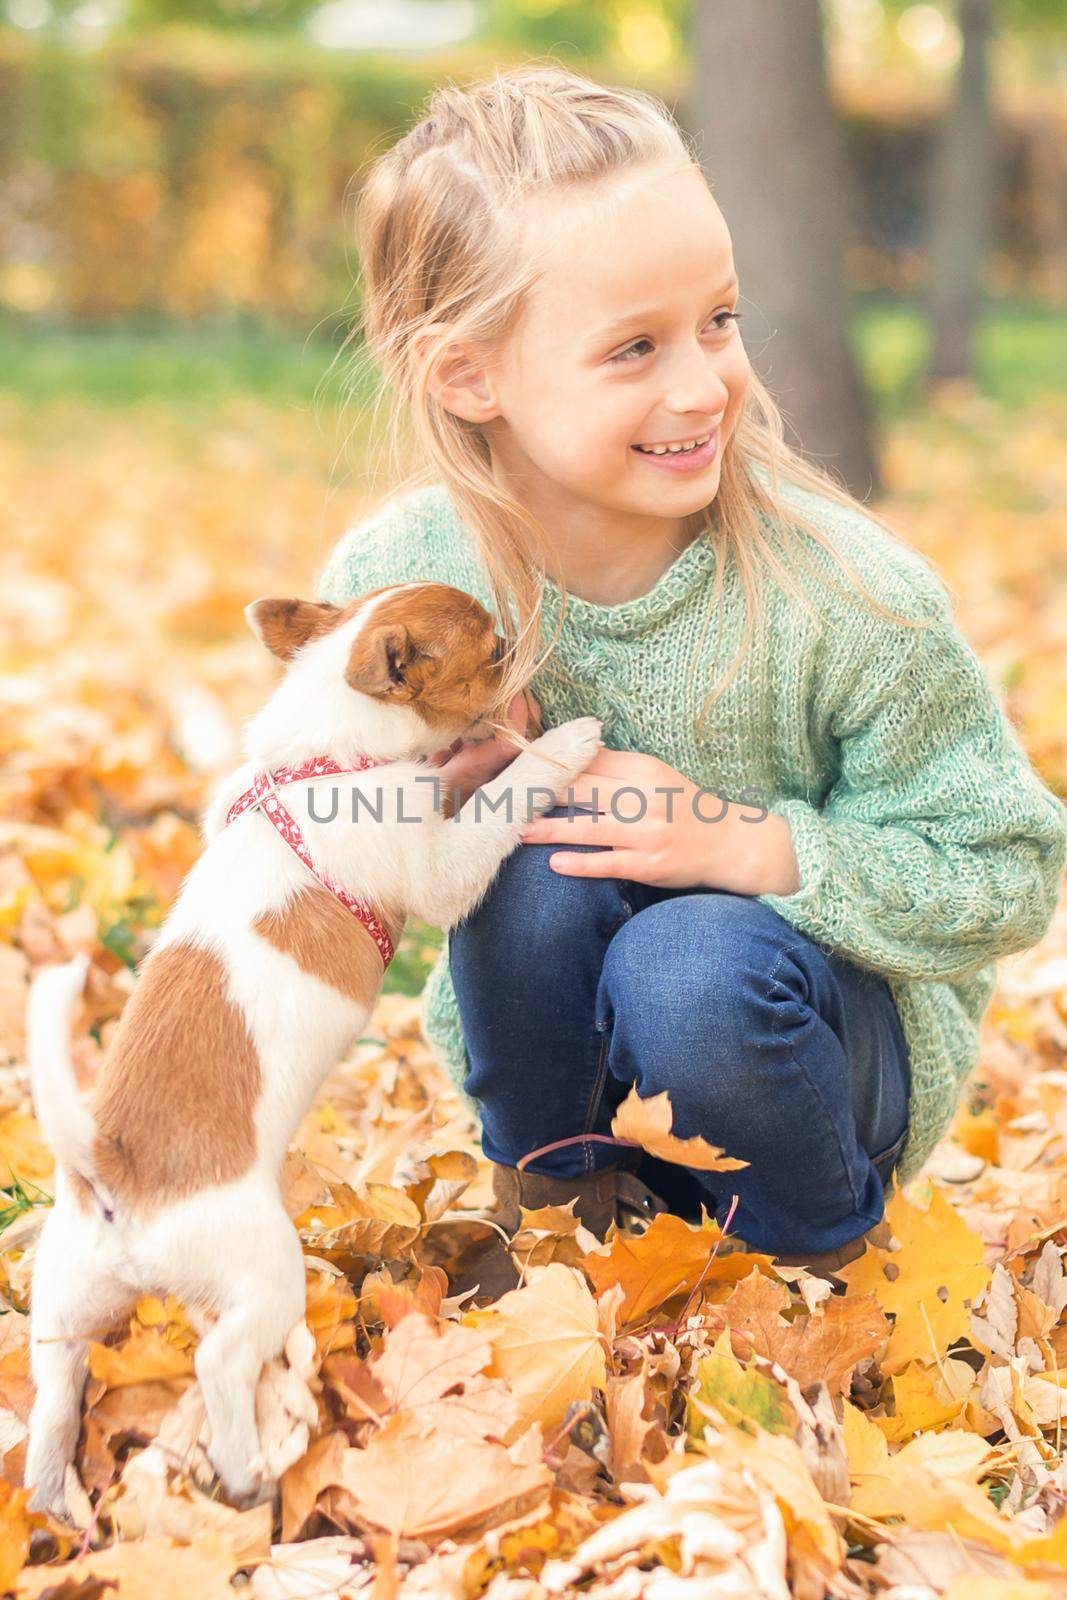 Small purebred dog with little caucasian girl playing in the autumn park.